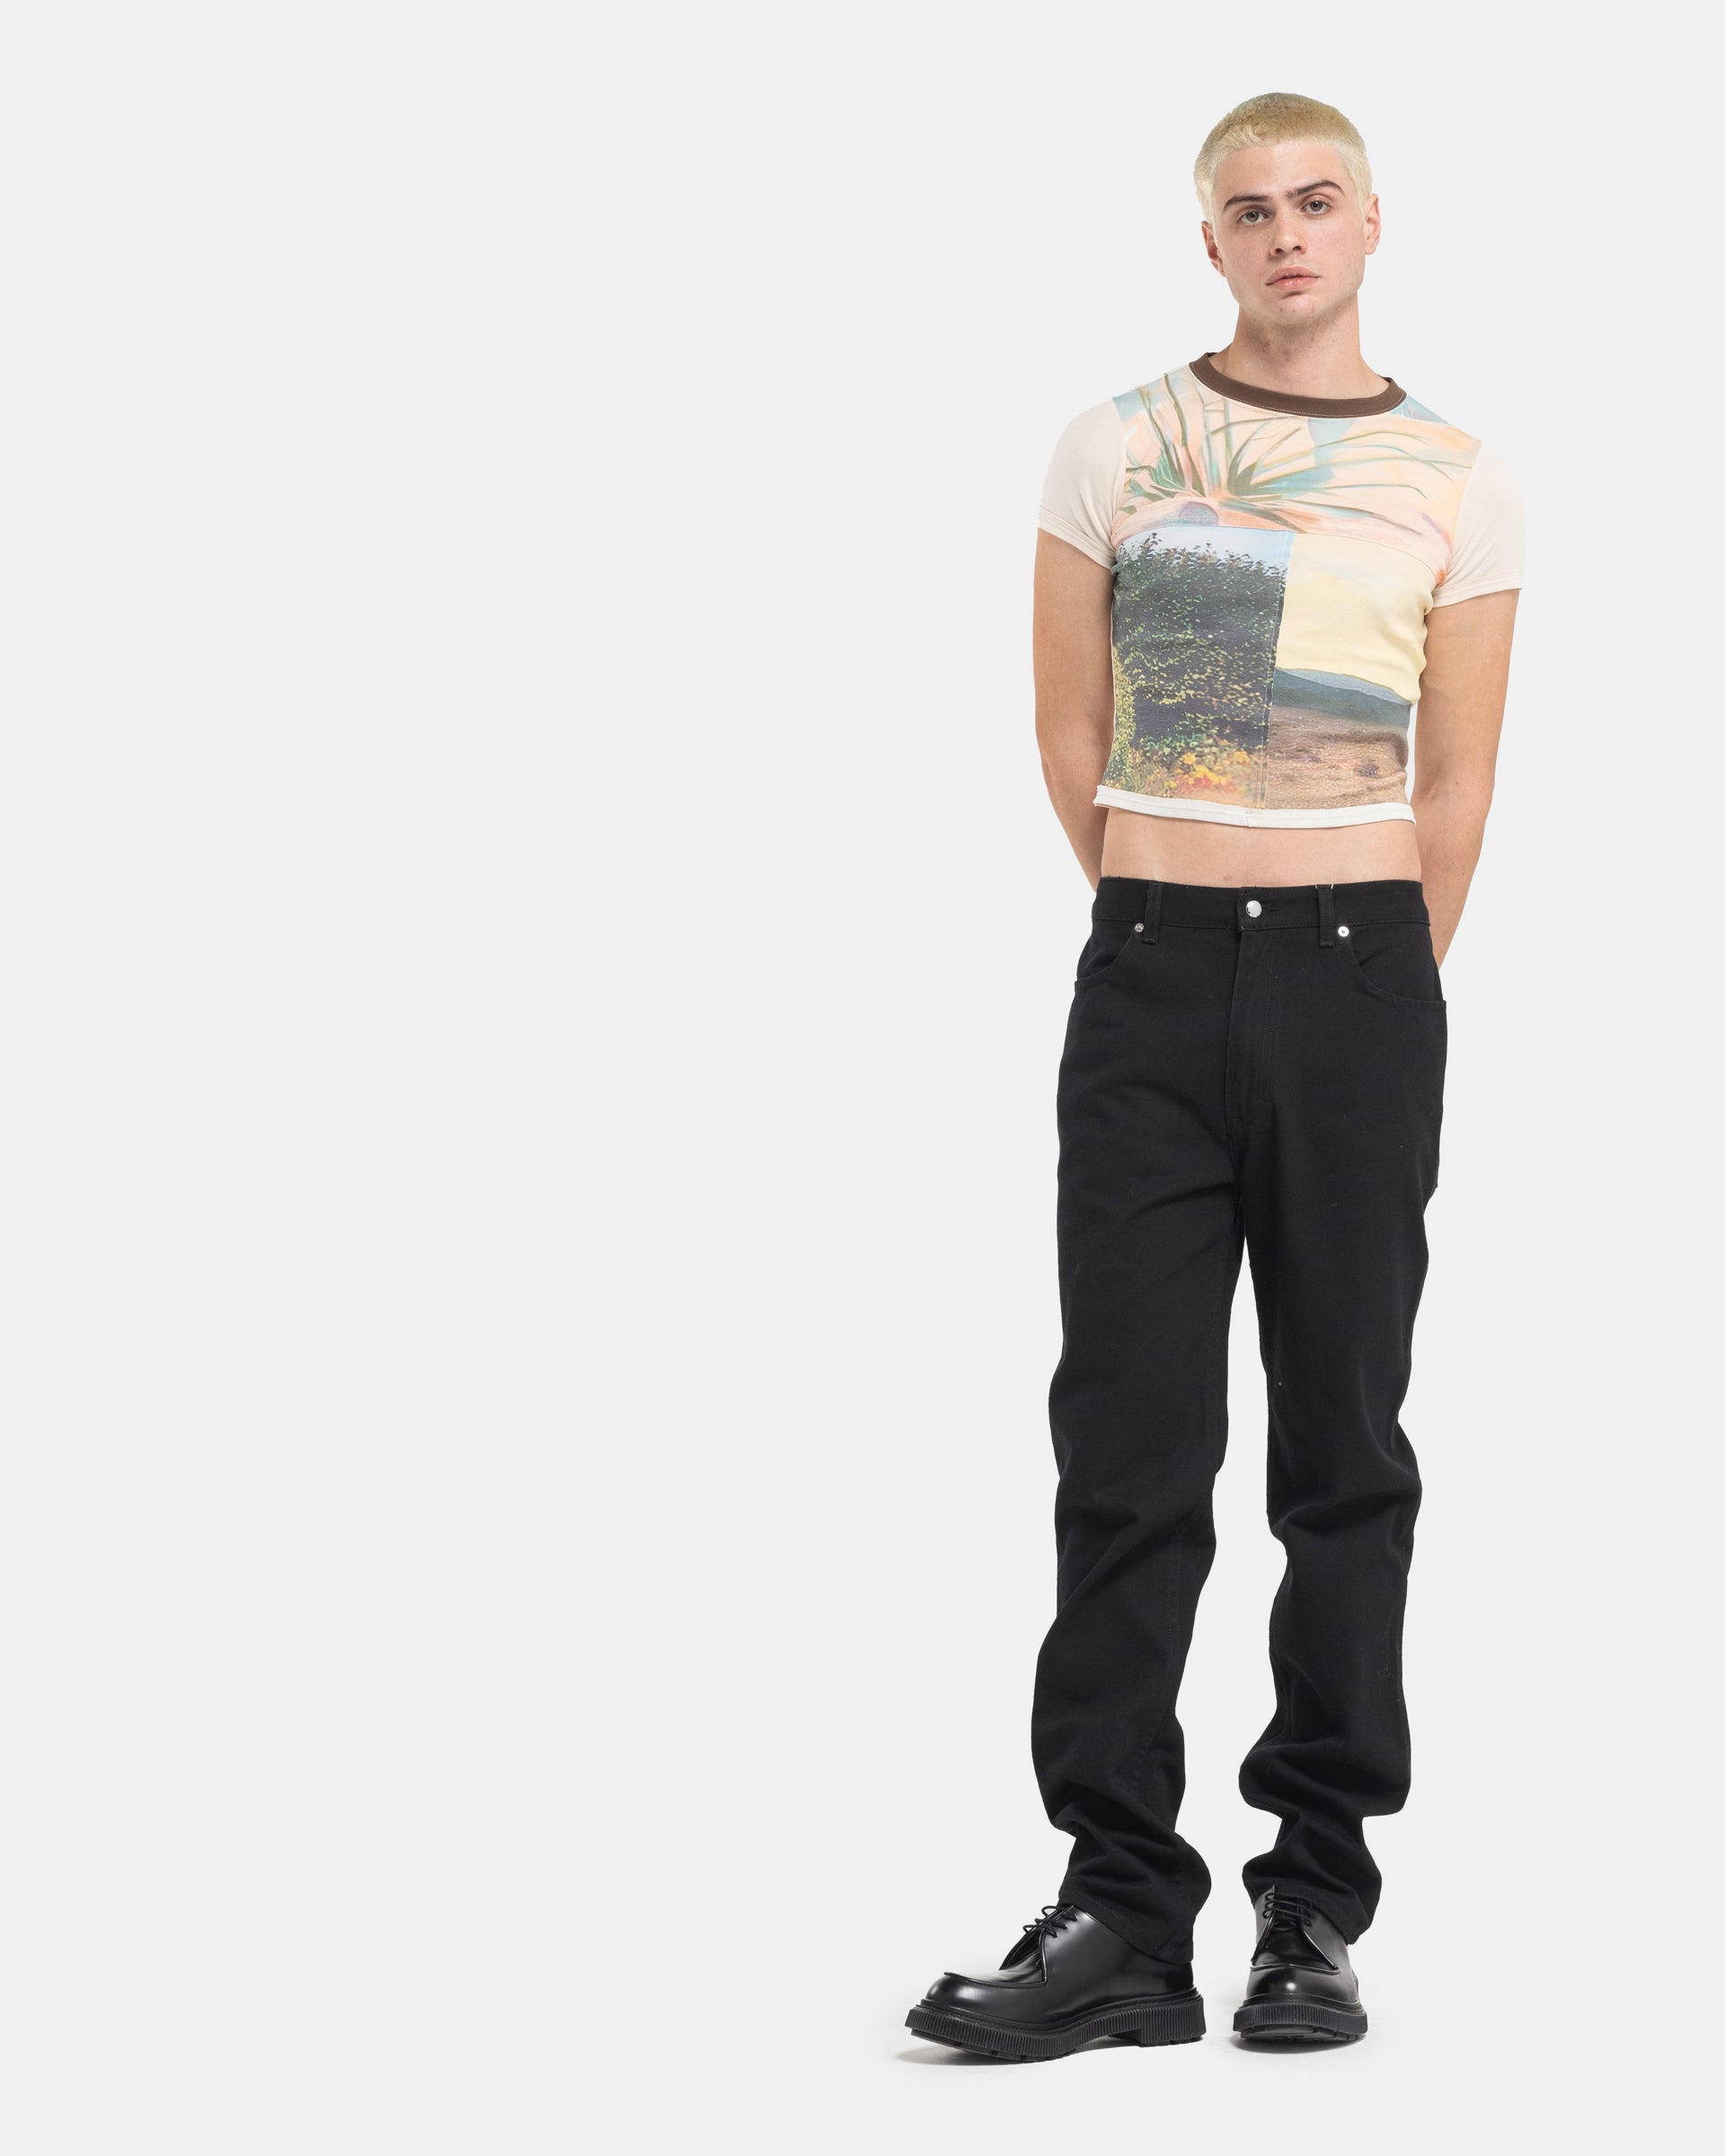 Male model wearing a Eckhaus Latta Lapped Baby Tee with a collage print design